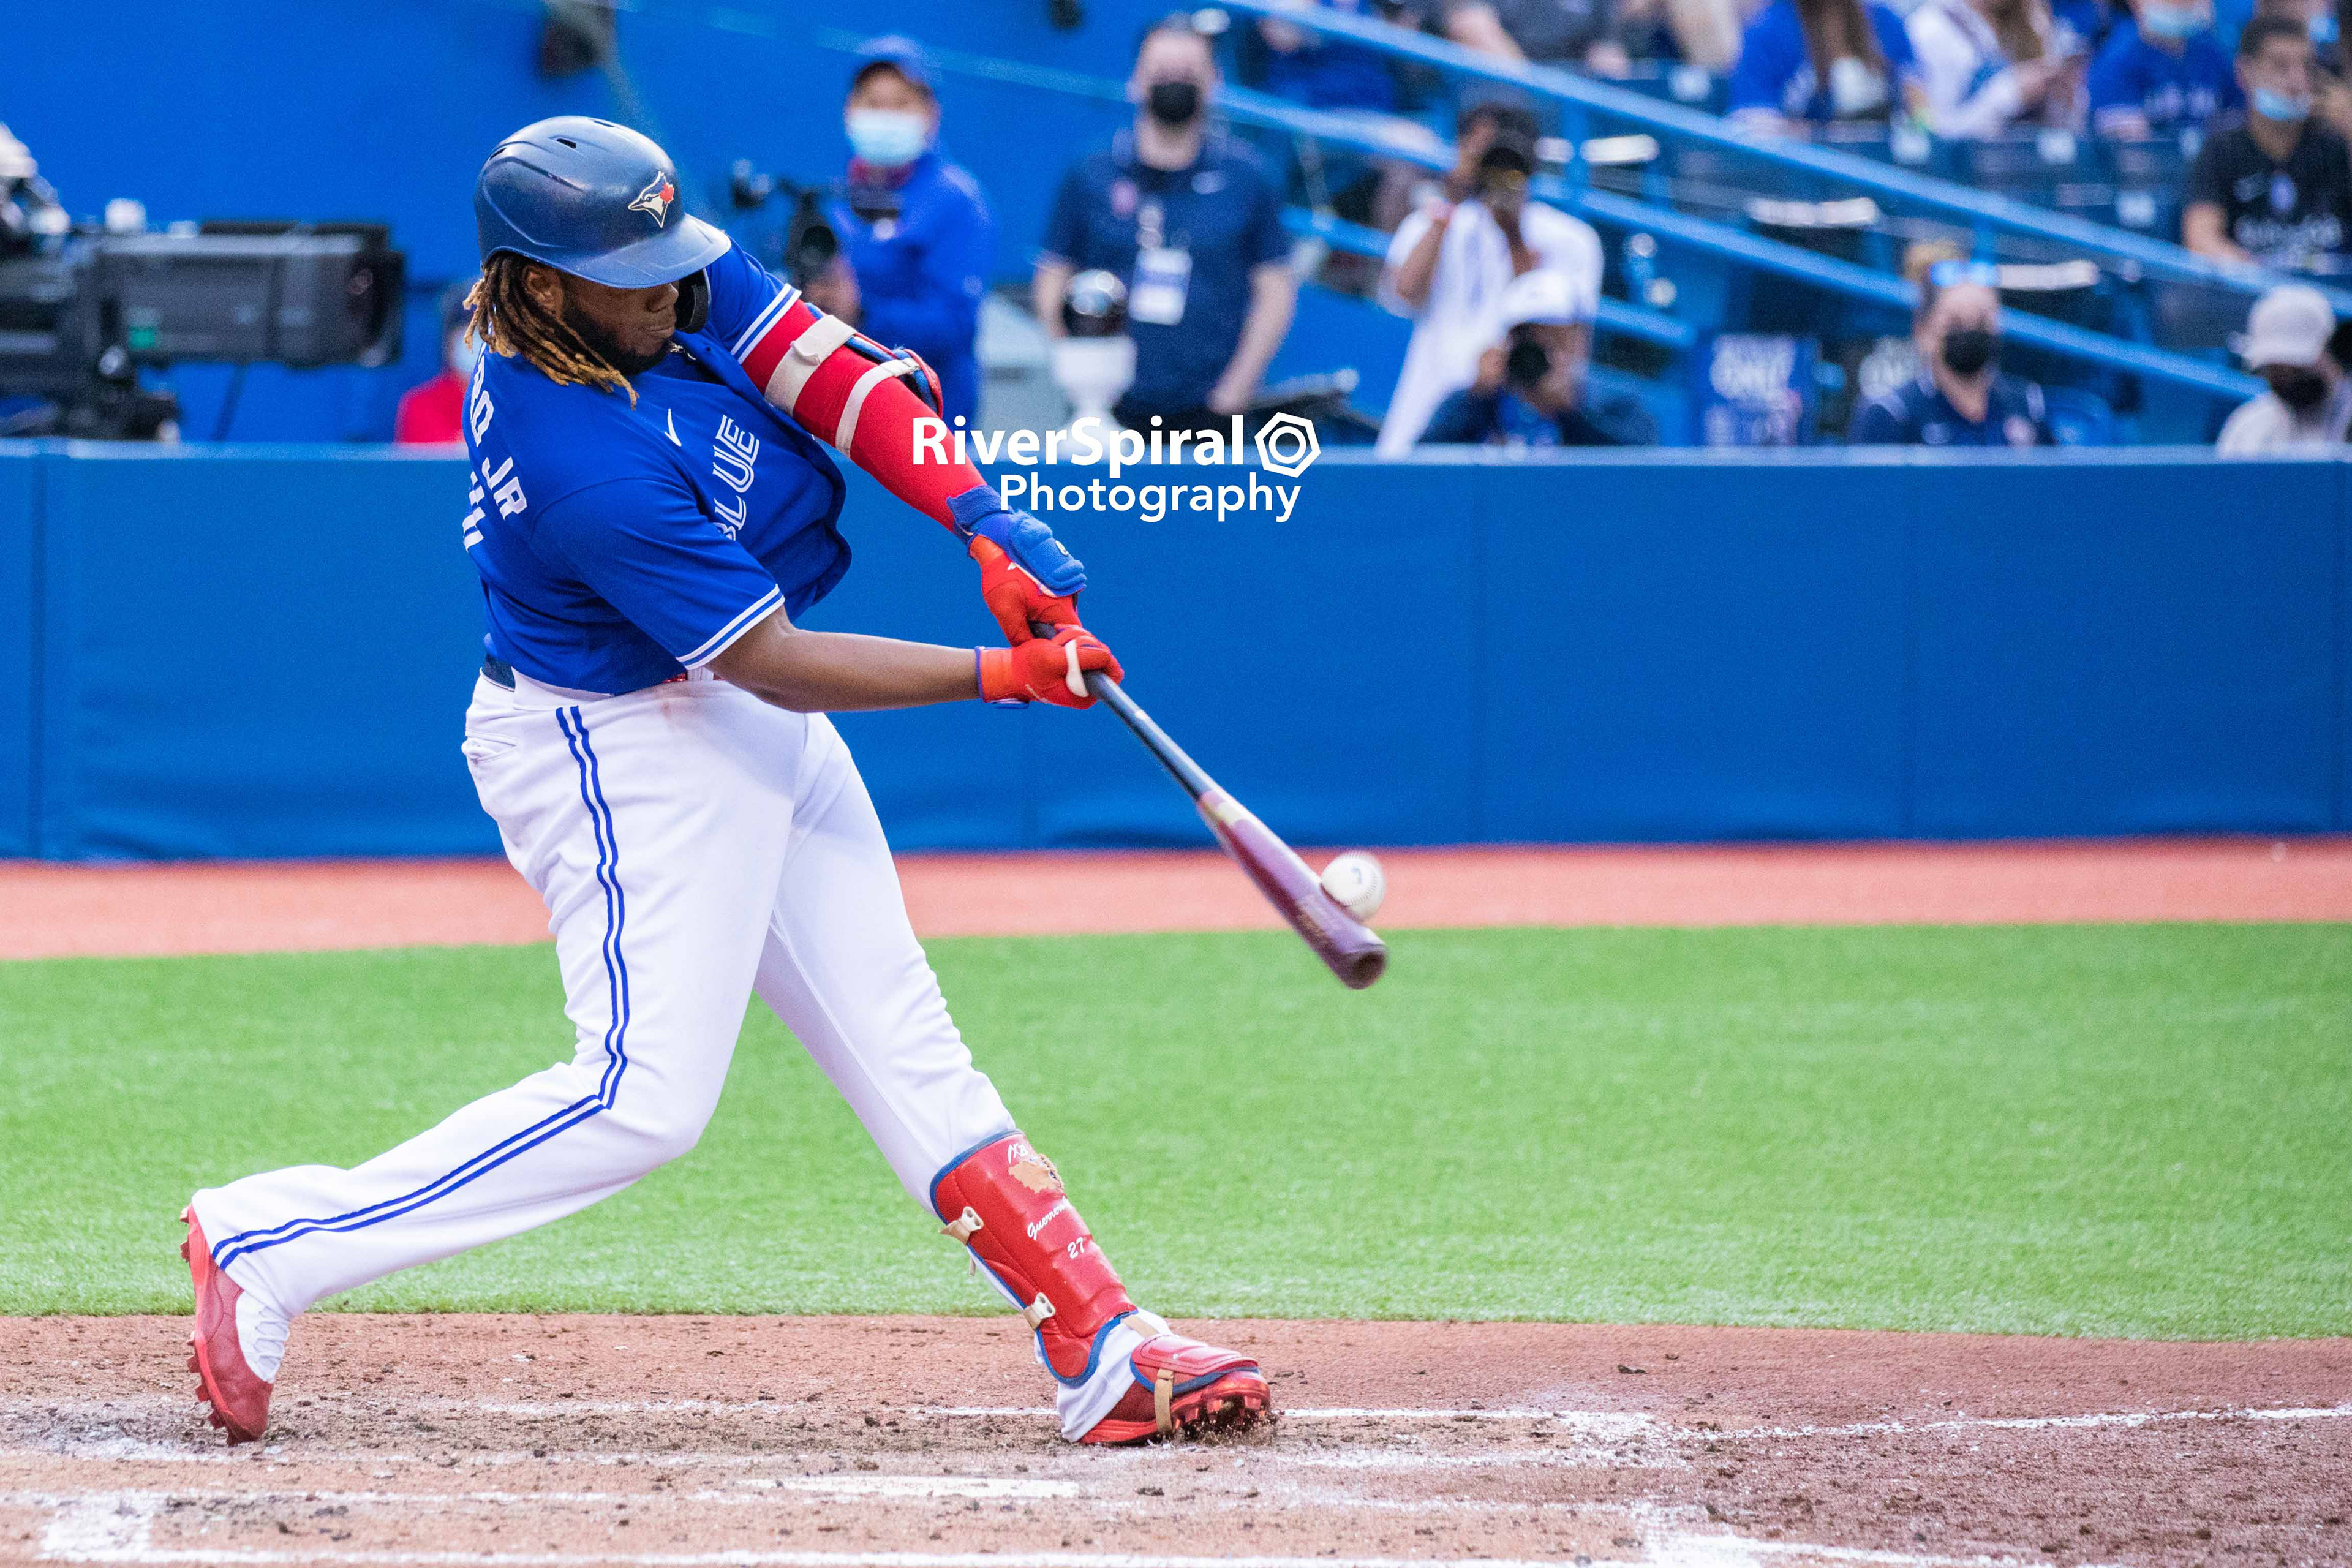 Vlad Guerrero Jr. and Braves mascot stage Home Run Derby